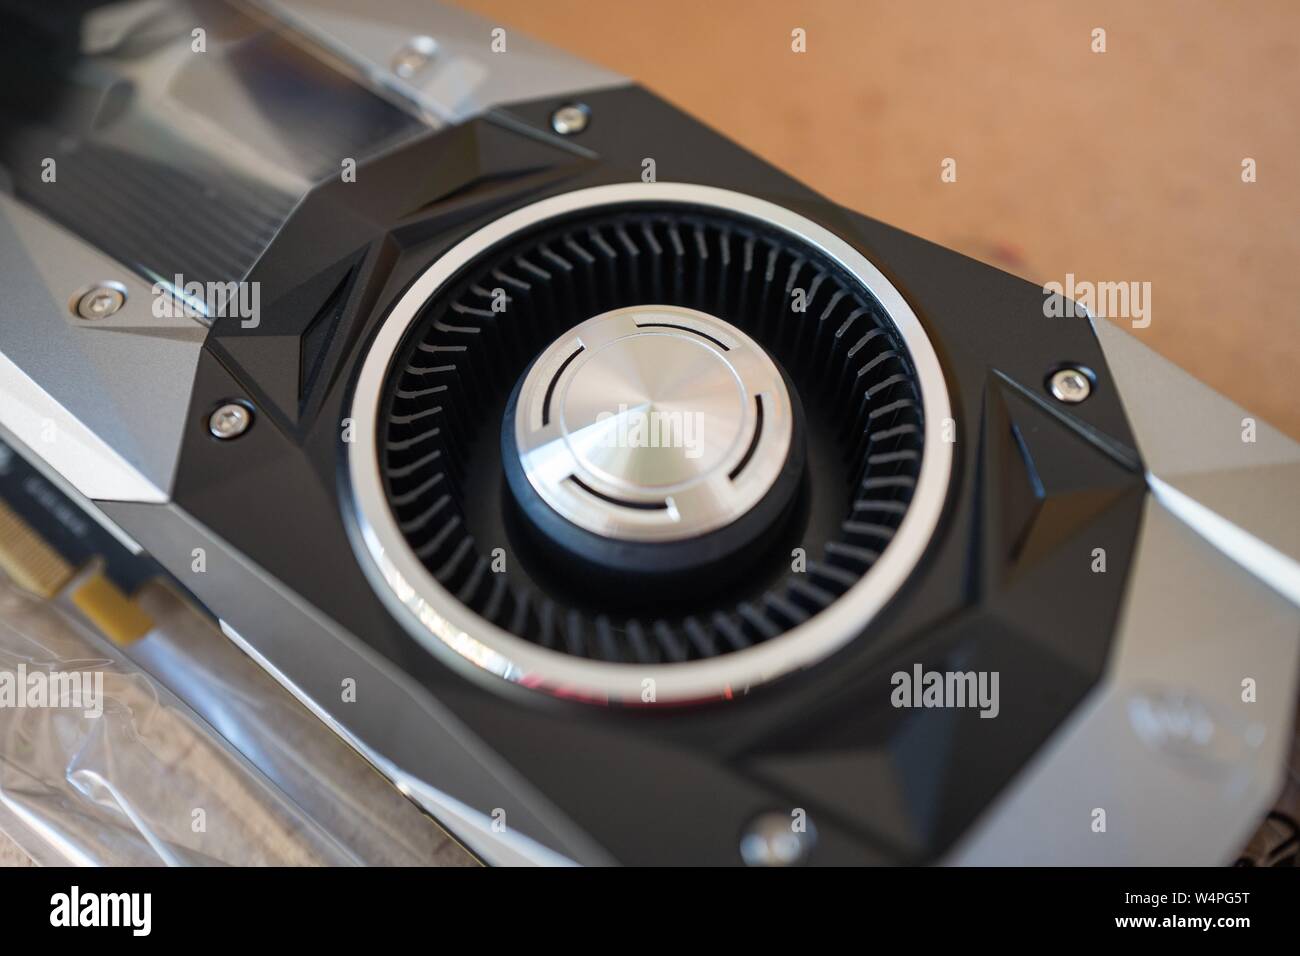 New Nvidia 1070 GTX Graphical Processing Unit (GPU), aka graphics card, close-up of cooling fan, prior to installation in a cryptocurrency mining computer for mining Bitcoin alternatives, San Ramon, California, August 28, 2018. () Stock Photo